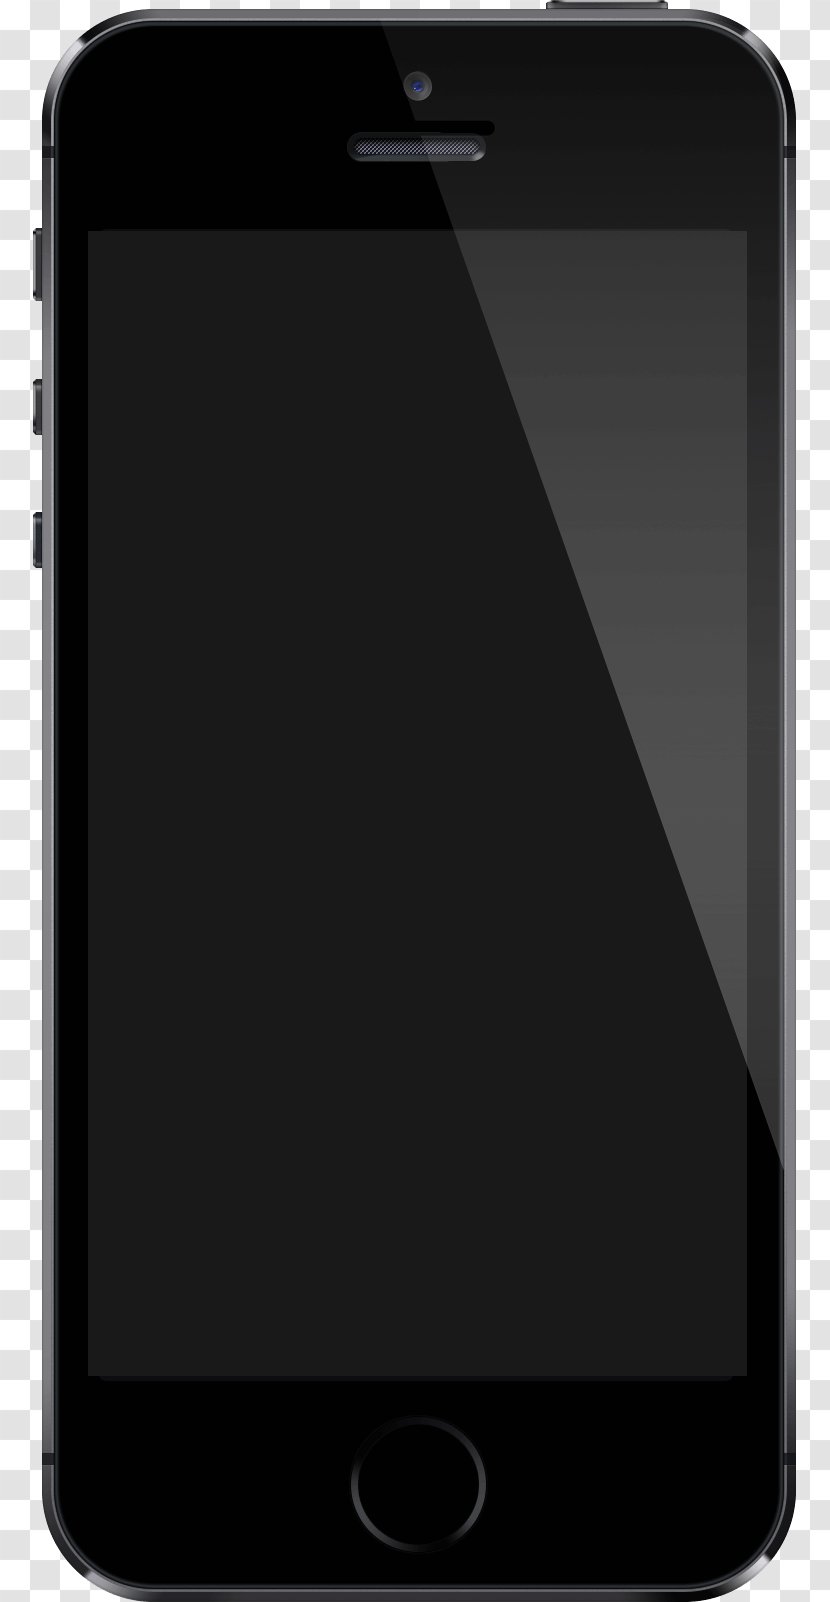 IPhone 4S 6 5 3GS - Apple - Iphone Image Transparent PNG